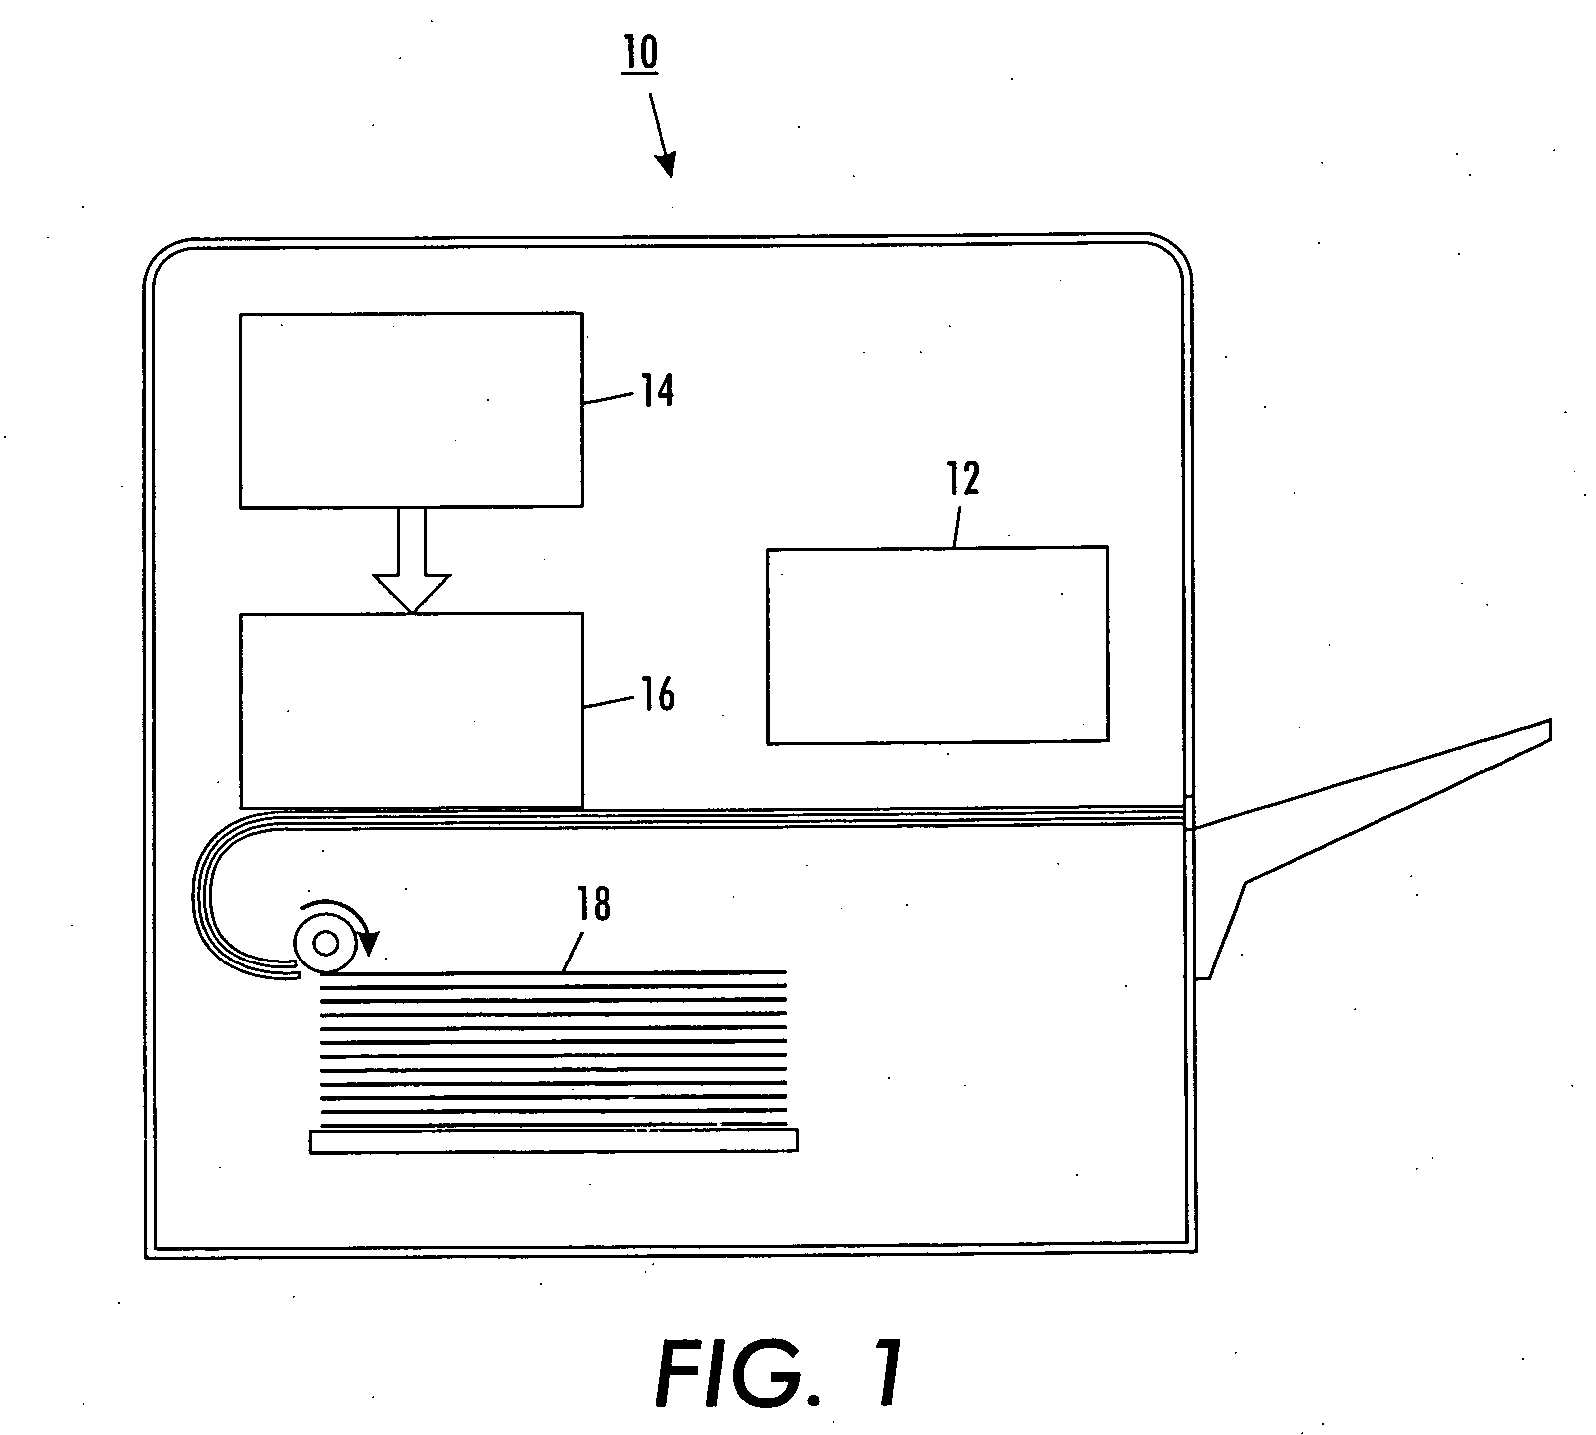 Systems and methods for monitoring replaceable units